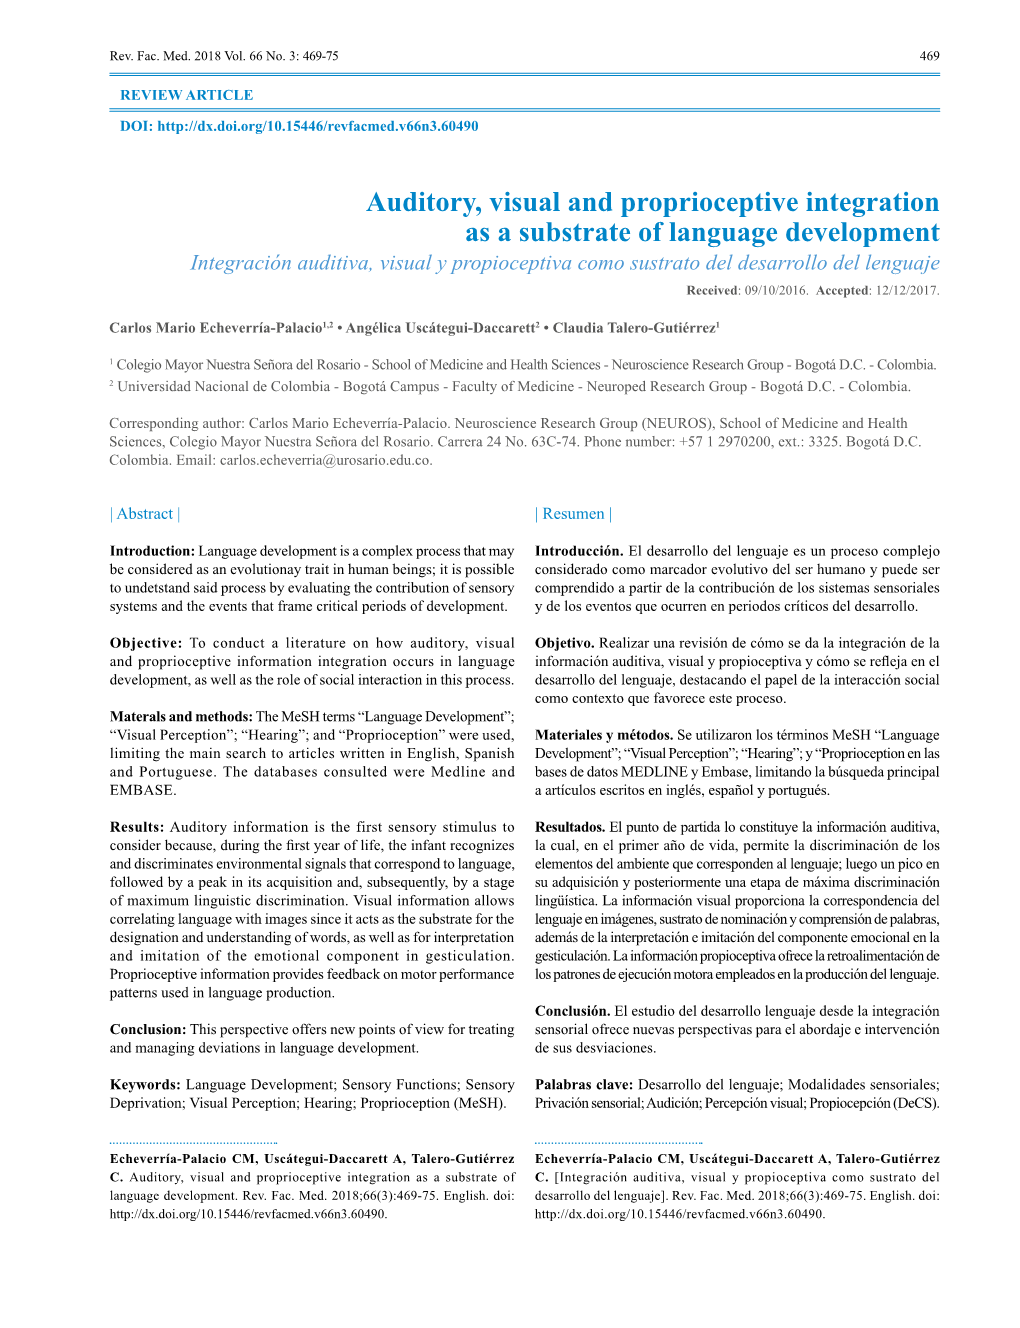 Auditory, Visual and Proprioceptive Integration As a Substrate of Language Development